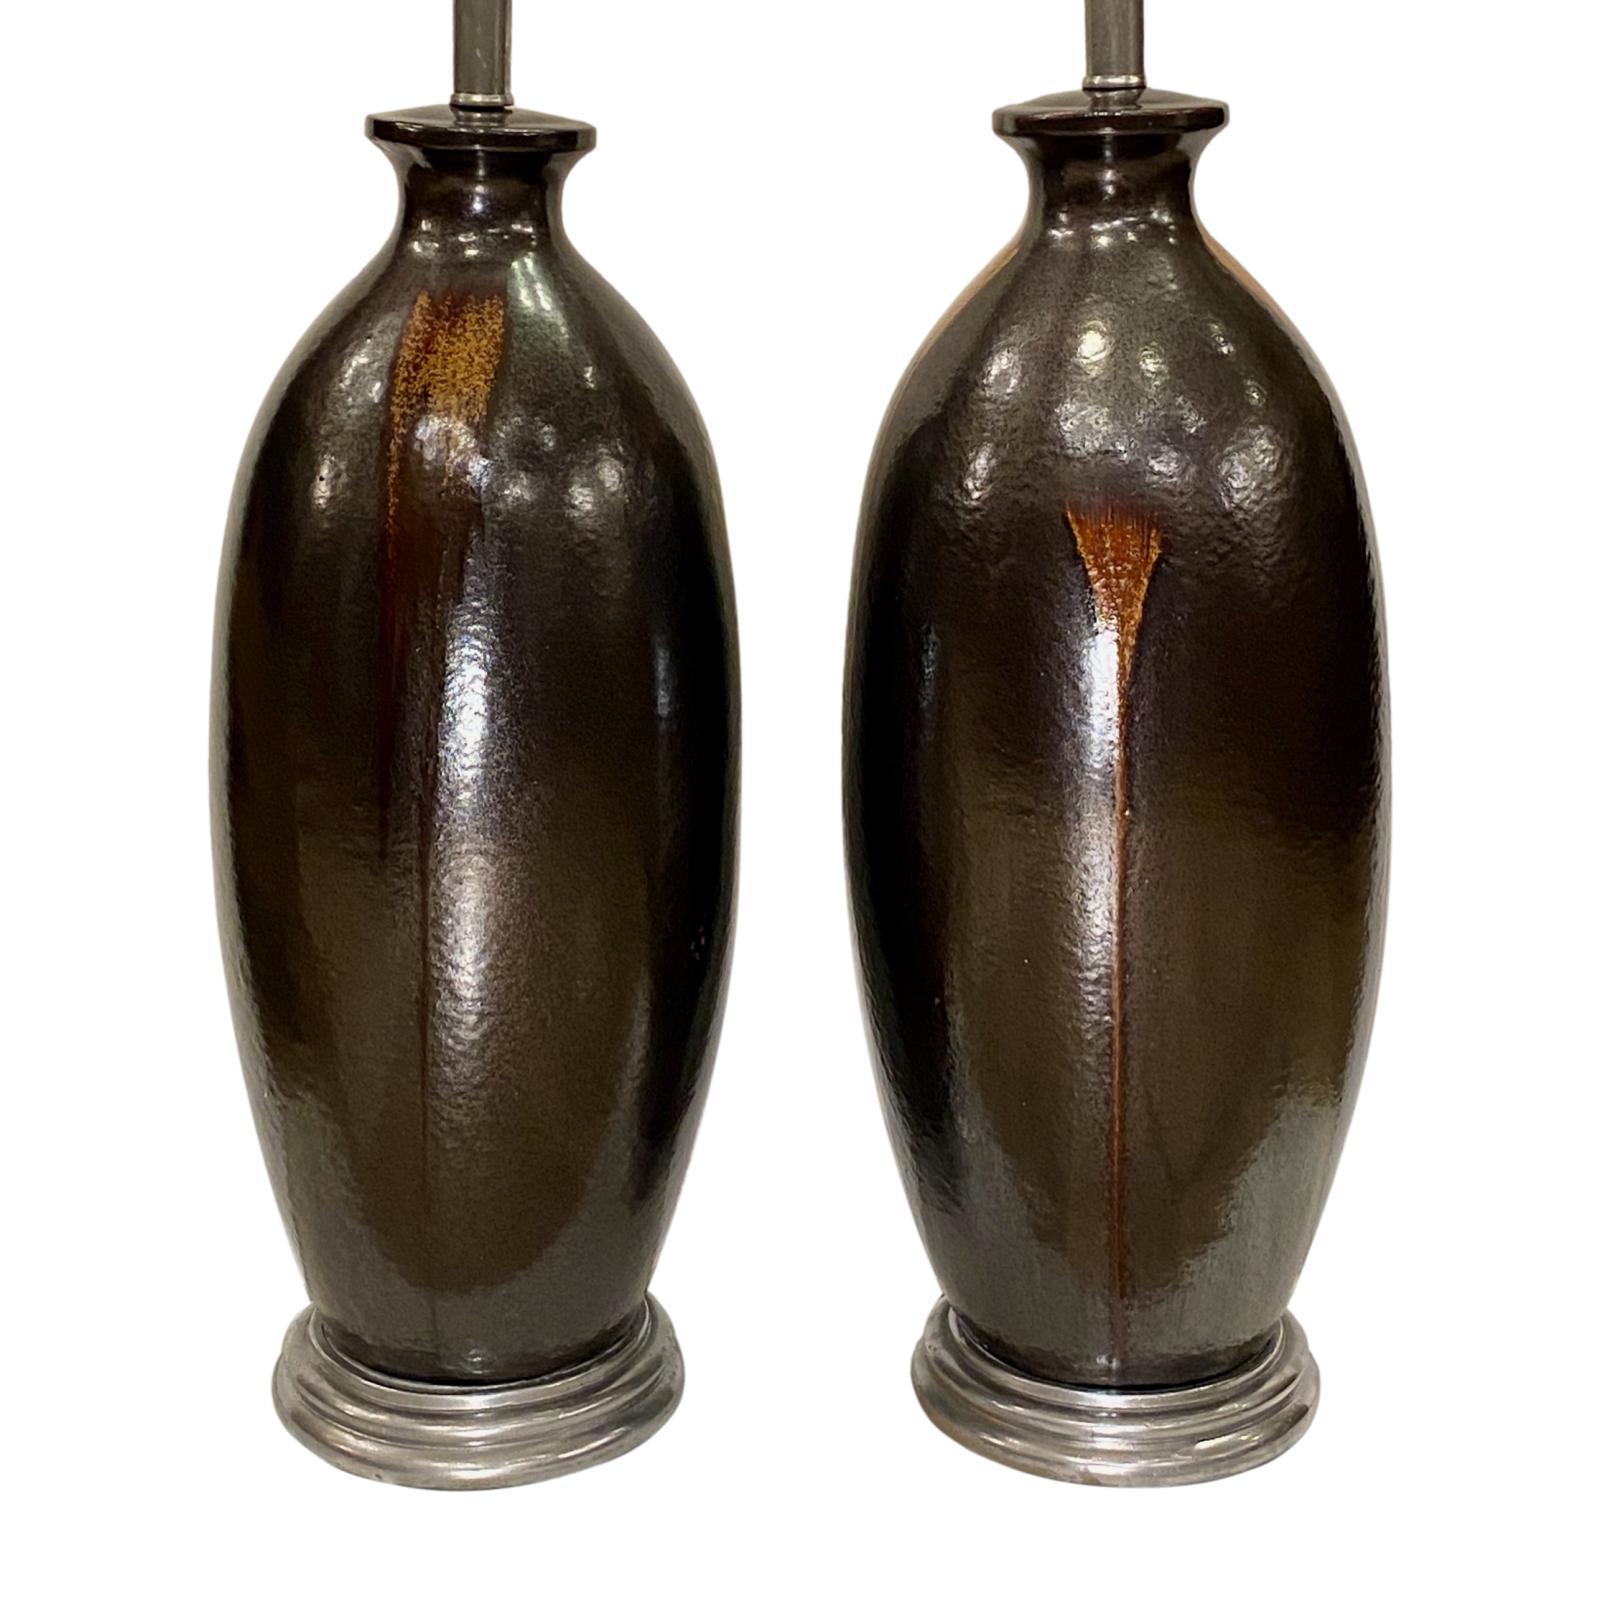 A pair of large circa 1950's French brown-glazed ceramic table lamps with silver leafed bases.

Measurements:
Height of body: 24